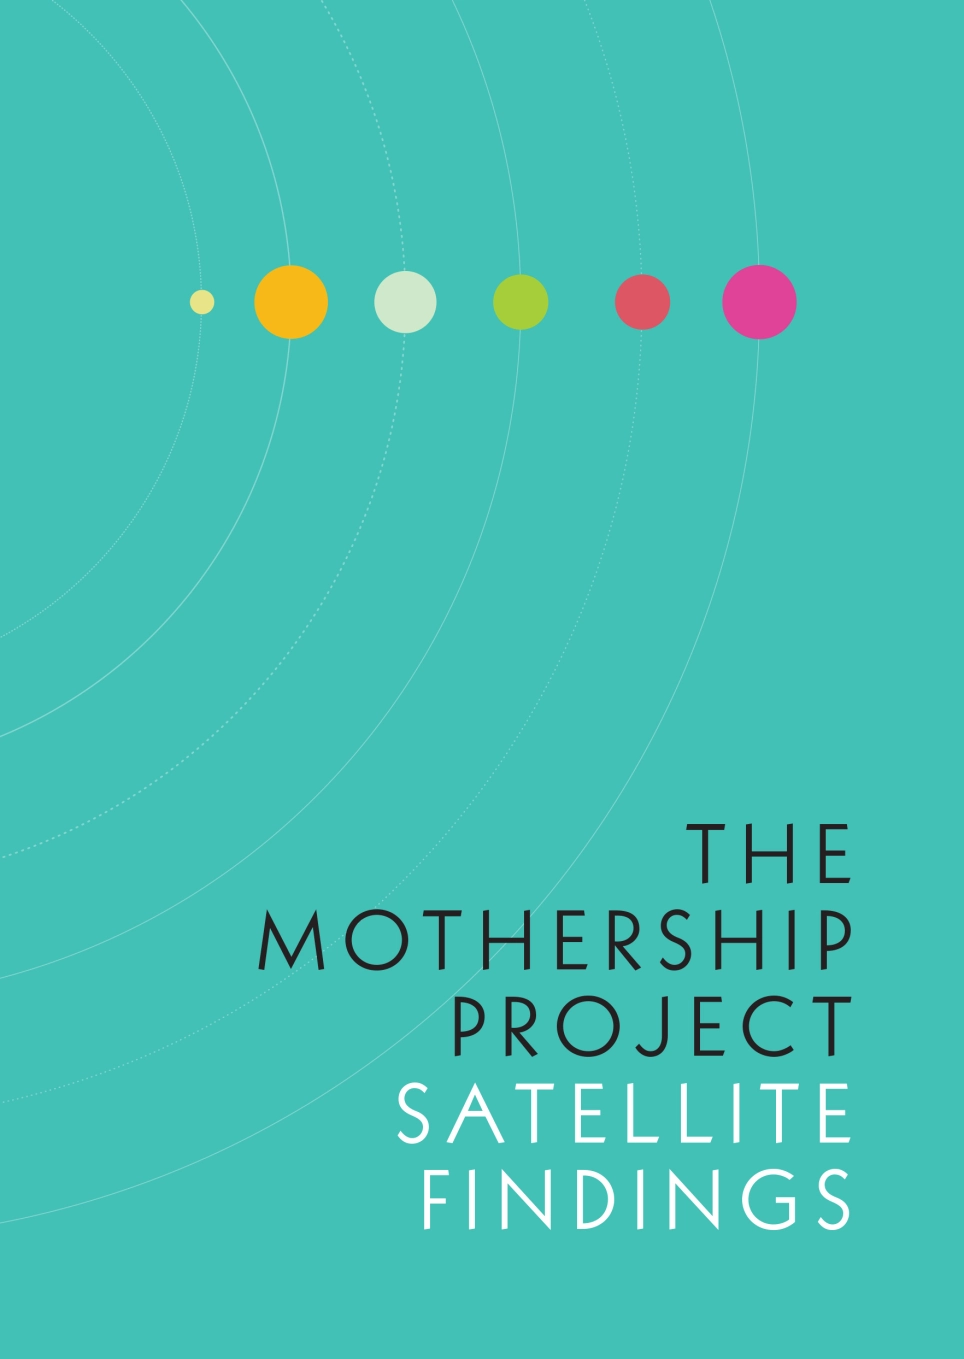 The Mothership Project Satellite Findings